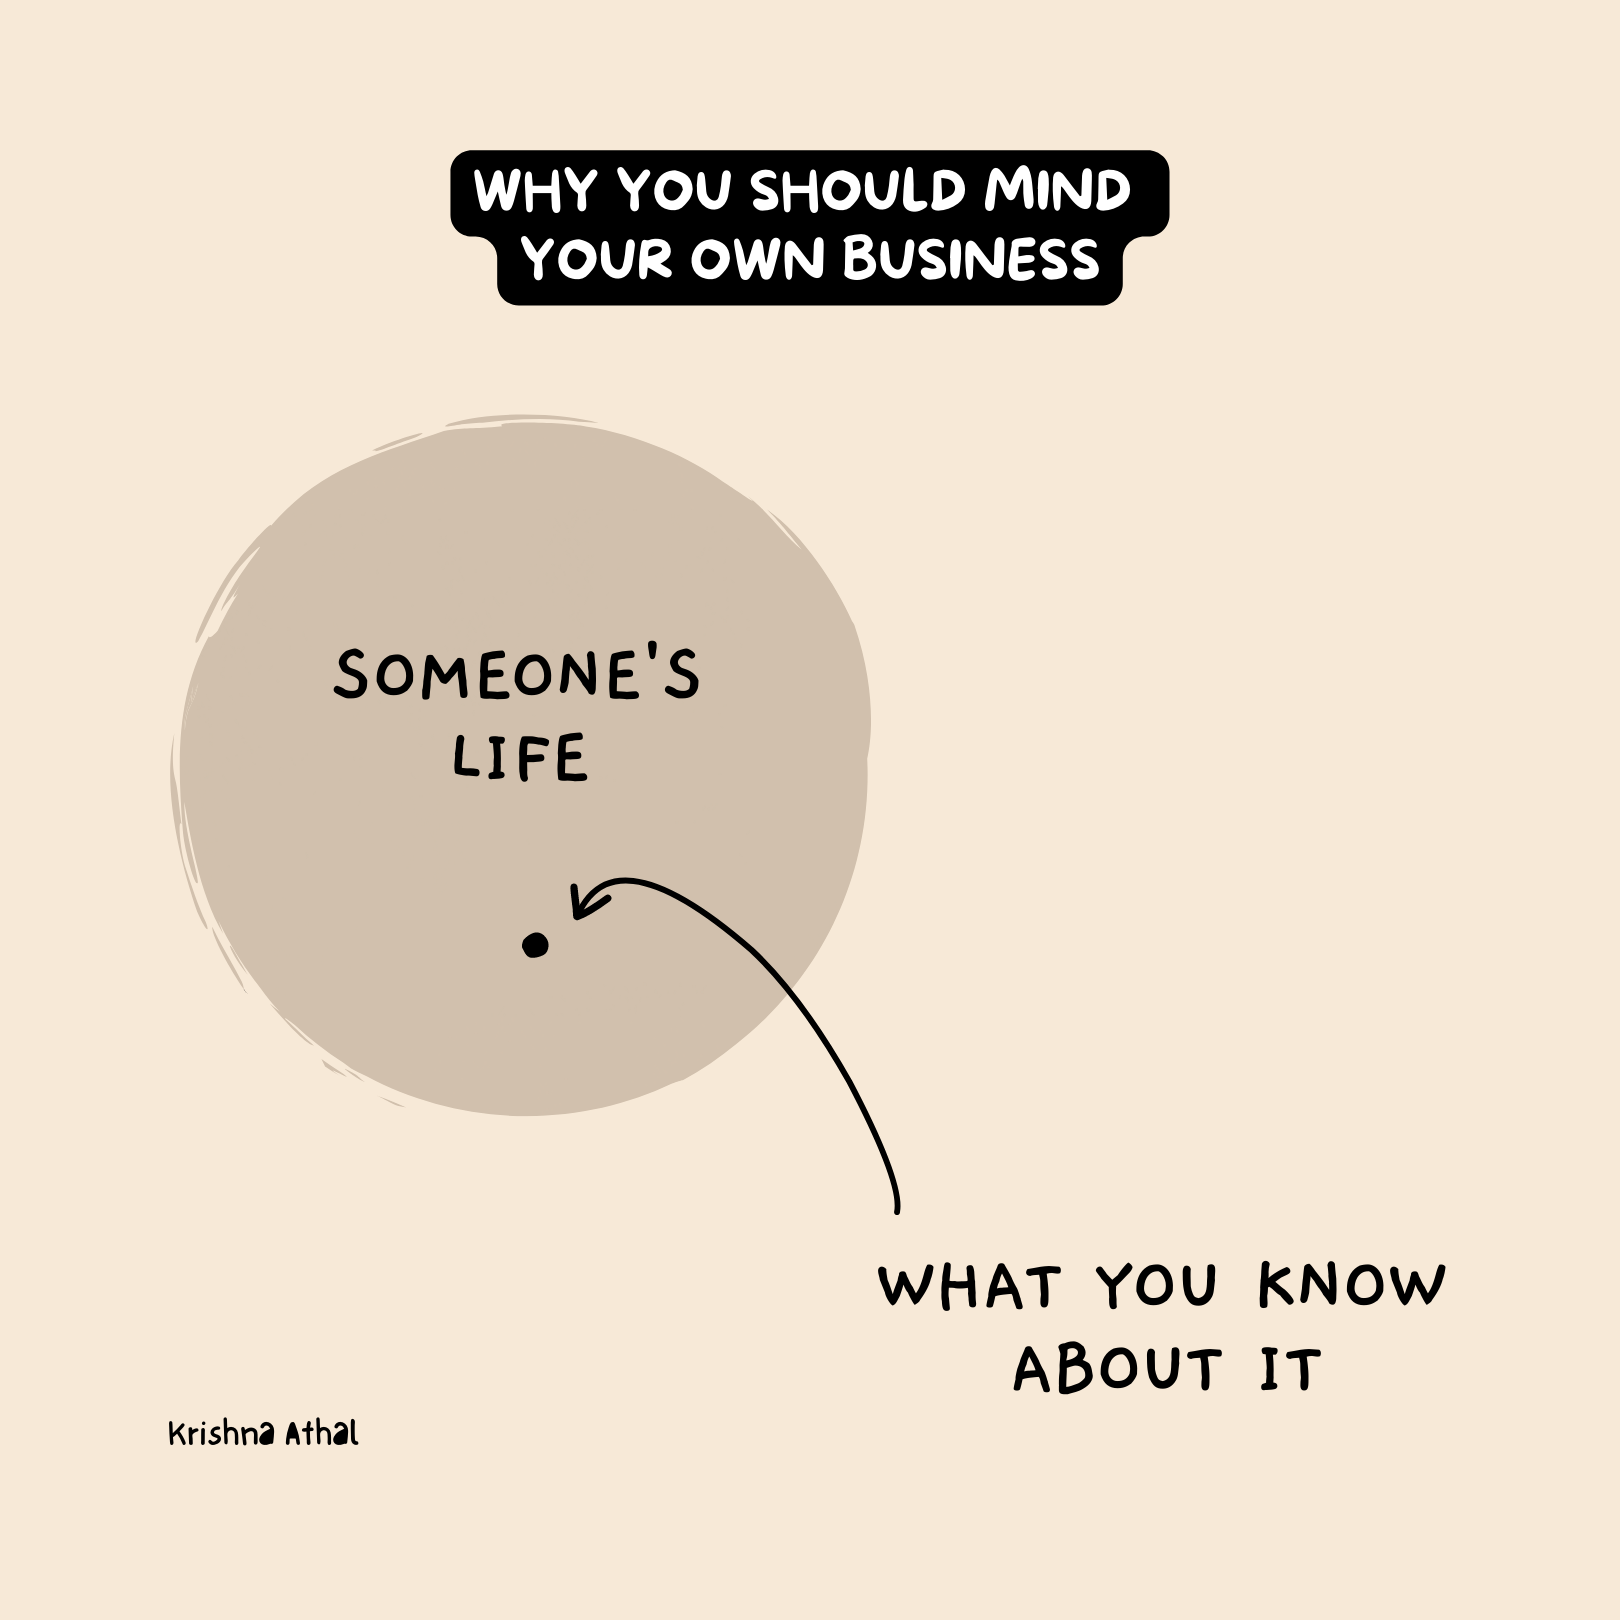 The business to mind your own business: Explained